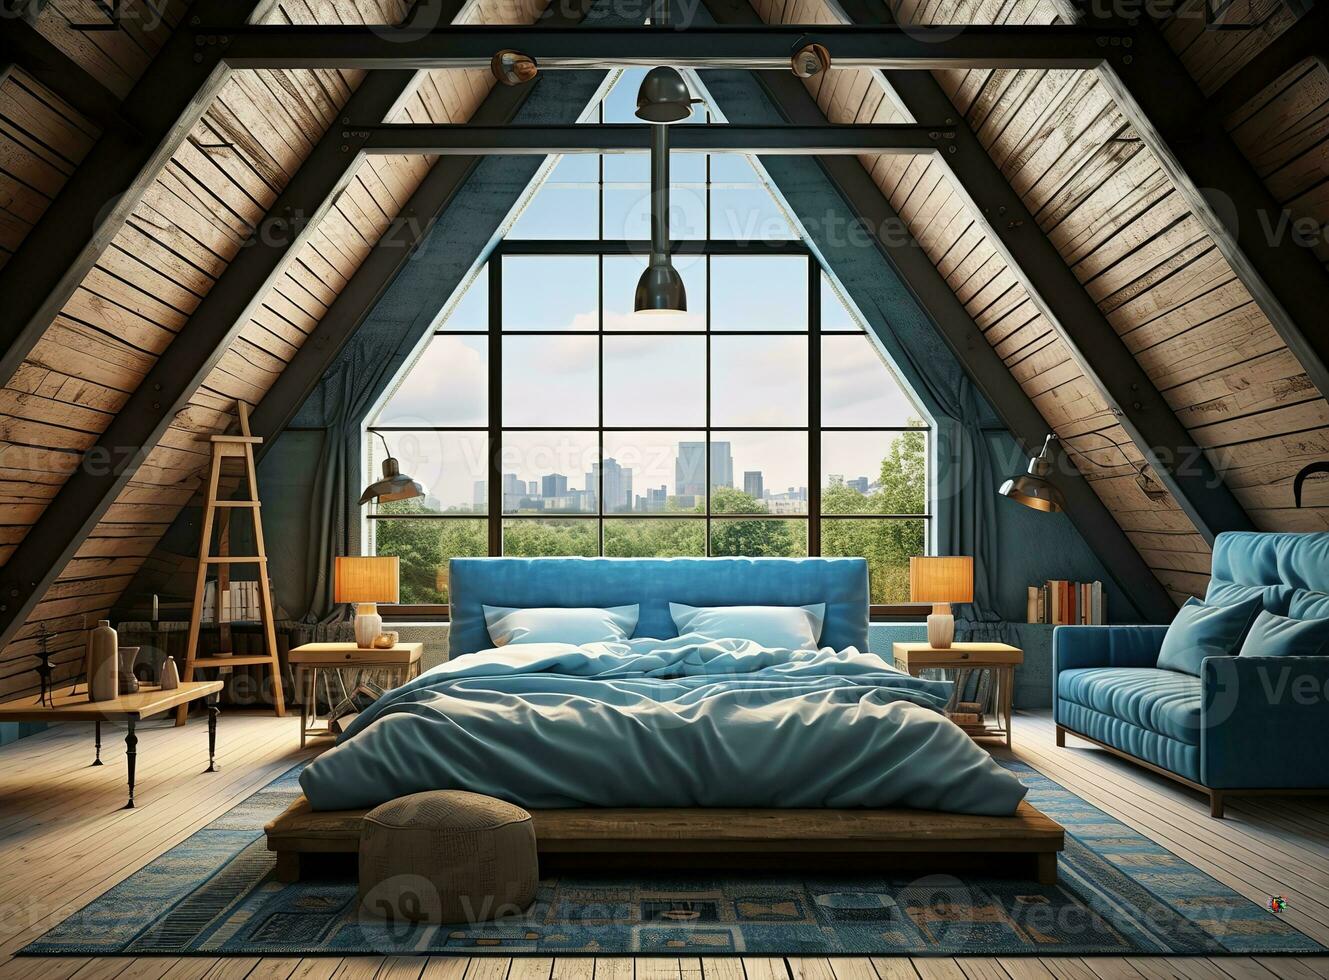 AI generated attic bedroom with a bed, dresser, and chair, lit by a skylight. The room is decorated in a neutral color palette with white walls and light wood furniture, creating a warm photo